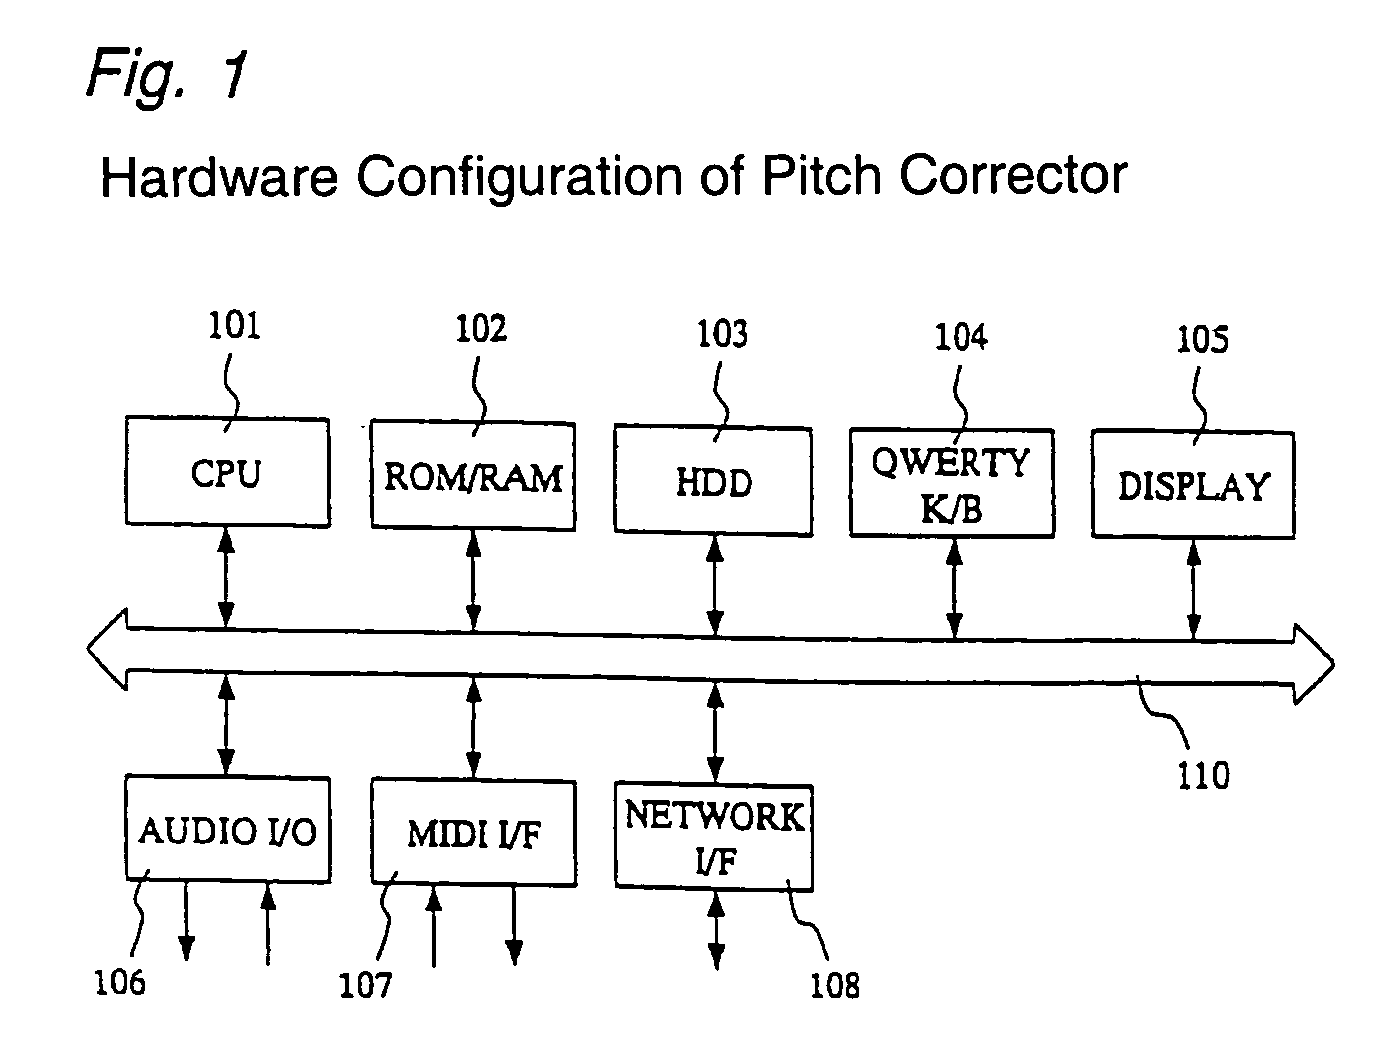 Apparatus and computer program for detecting and correcting tone pitches